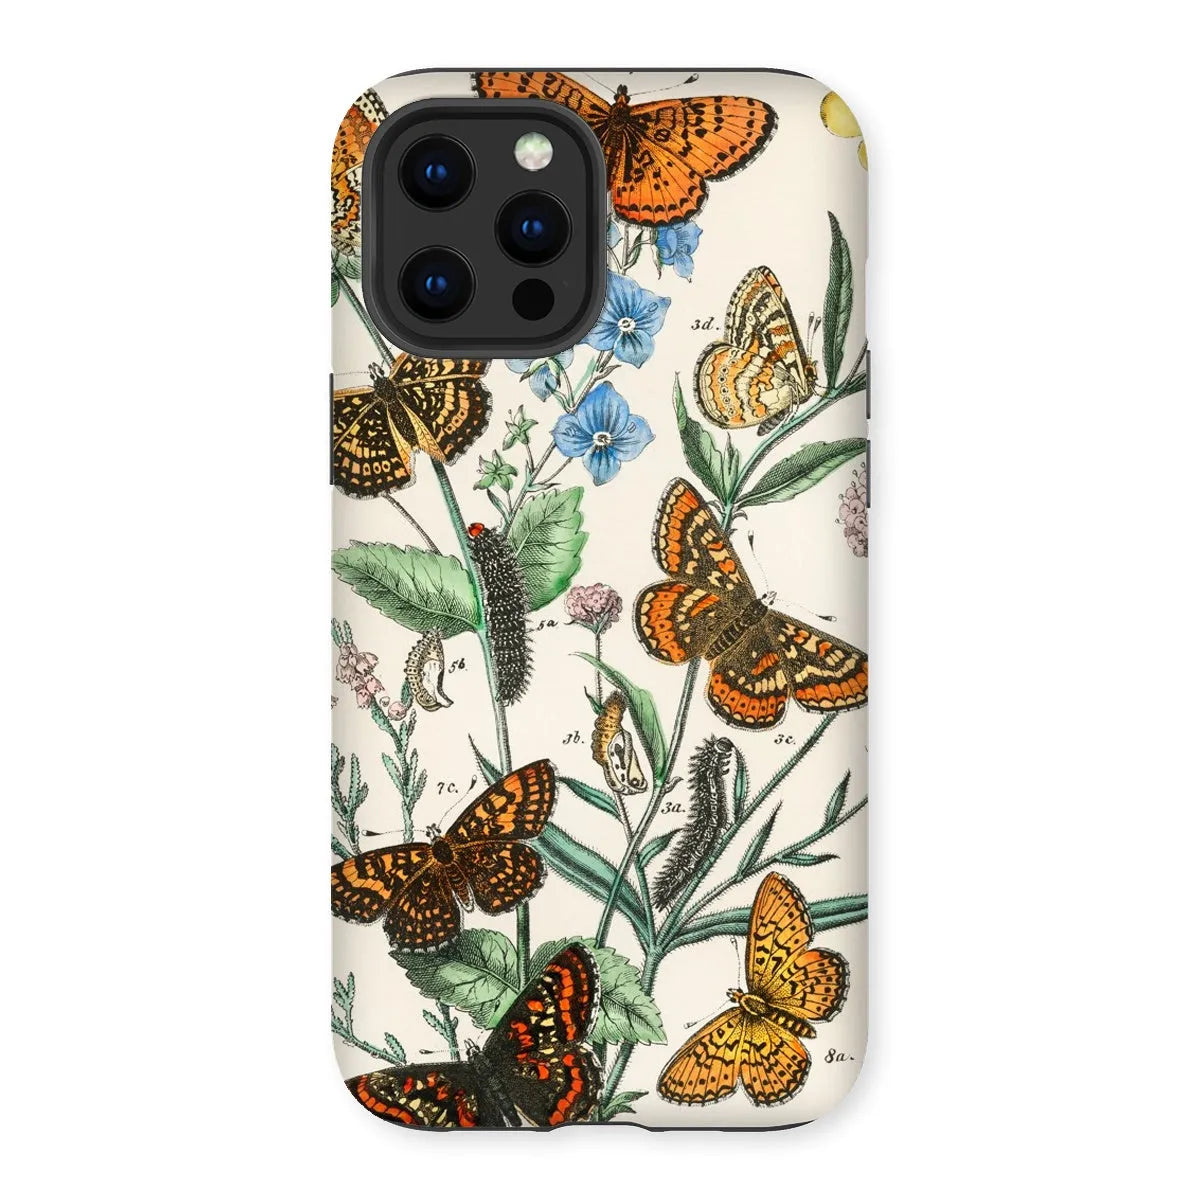 This Butterfly Aesthetic Art Phone Case - William Forsell Kirby - Iphone 12 Pro Max / Matte - Mobile Phone Cases